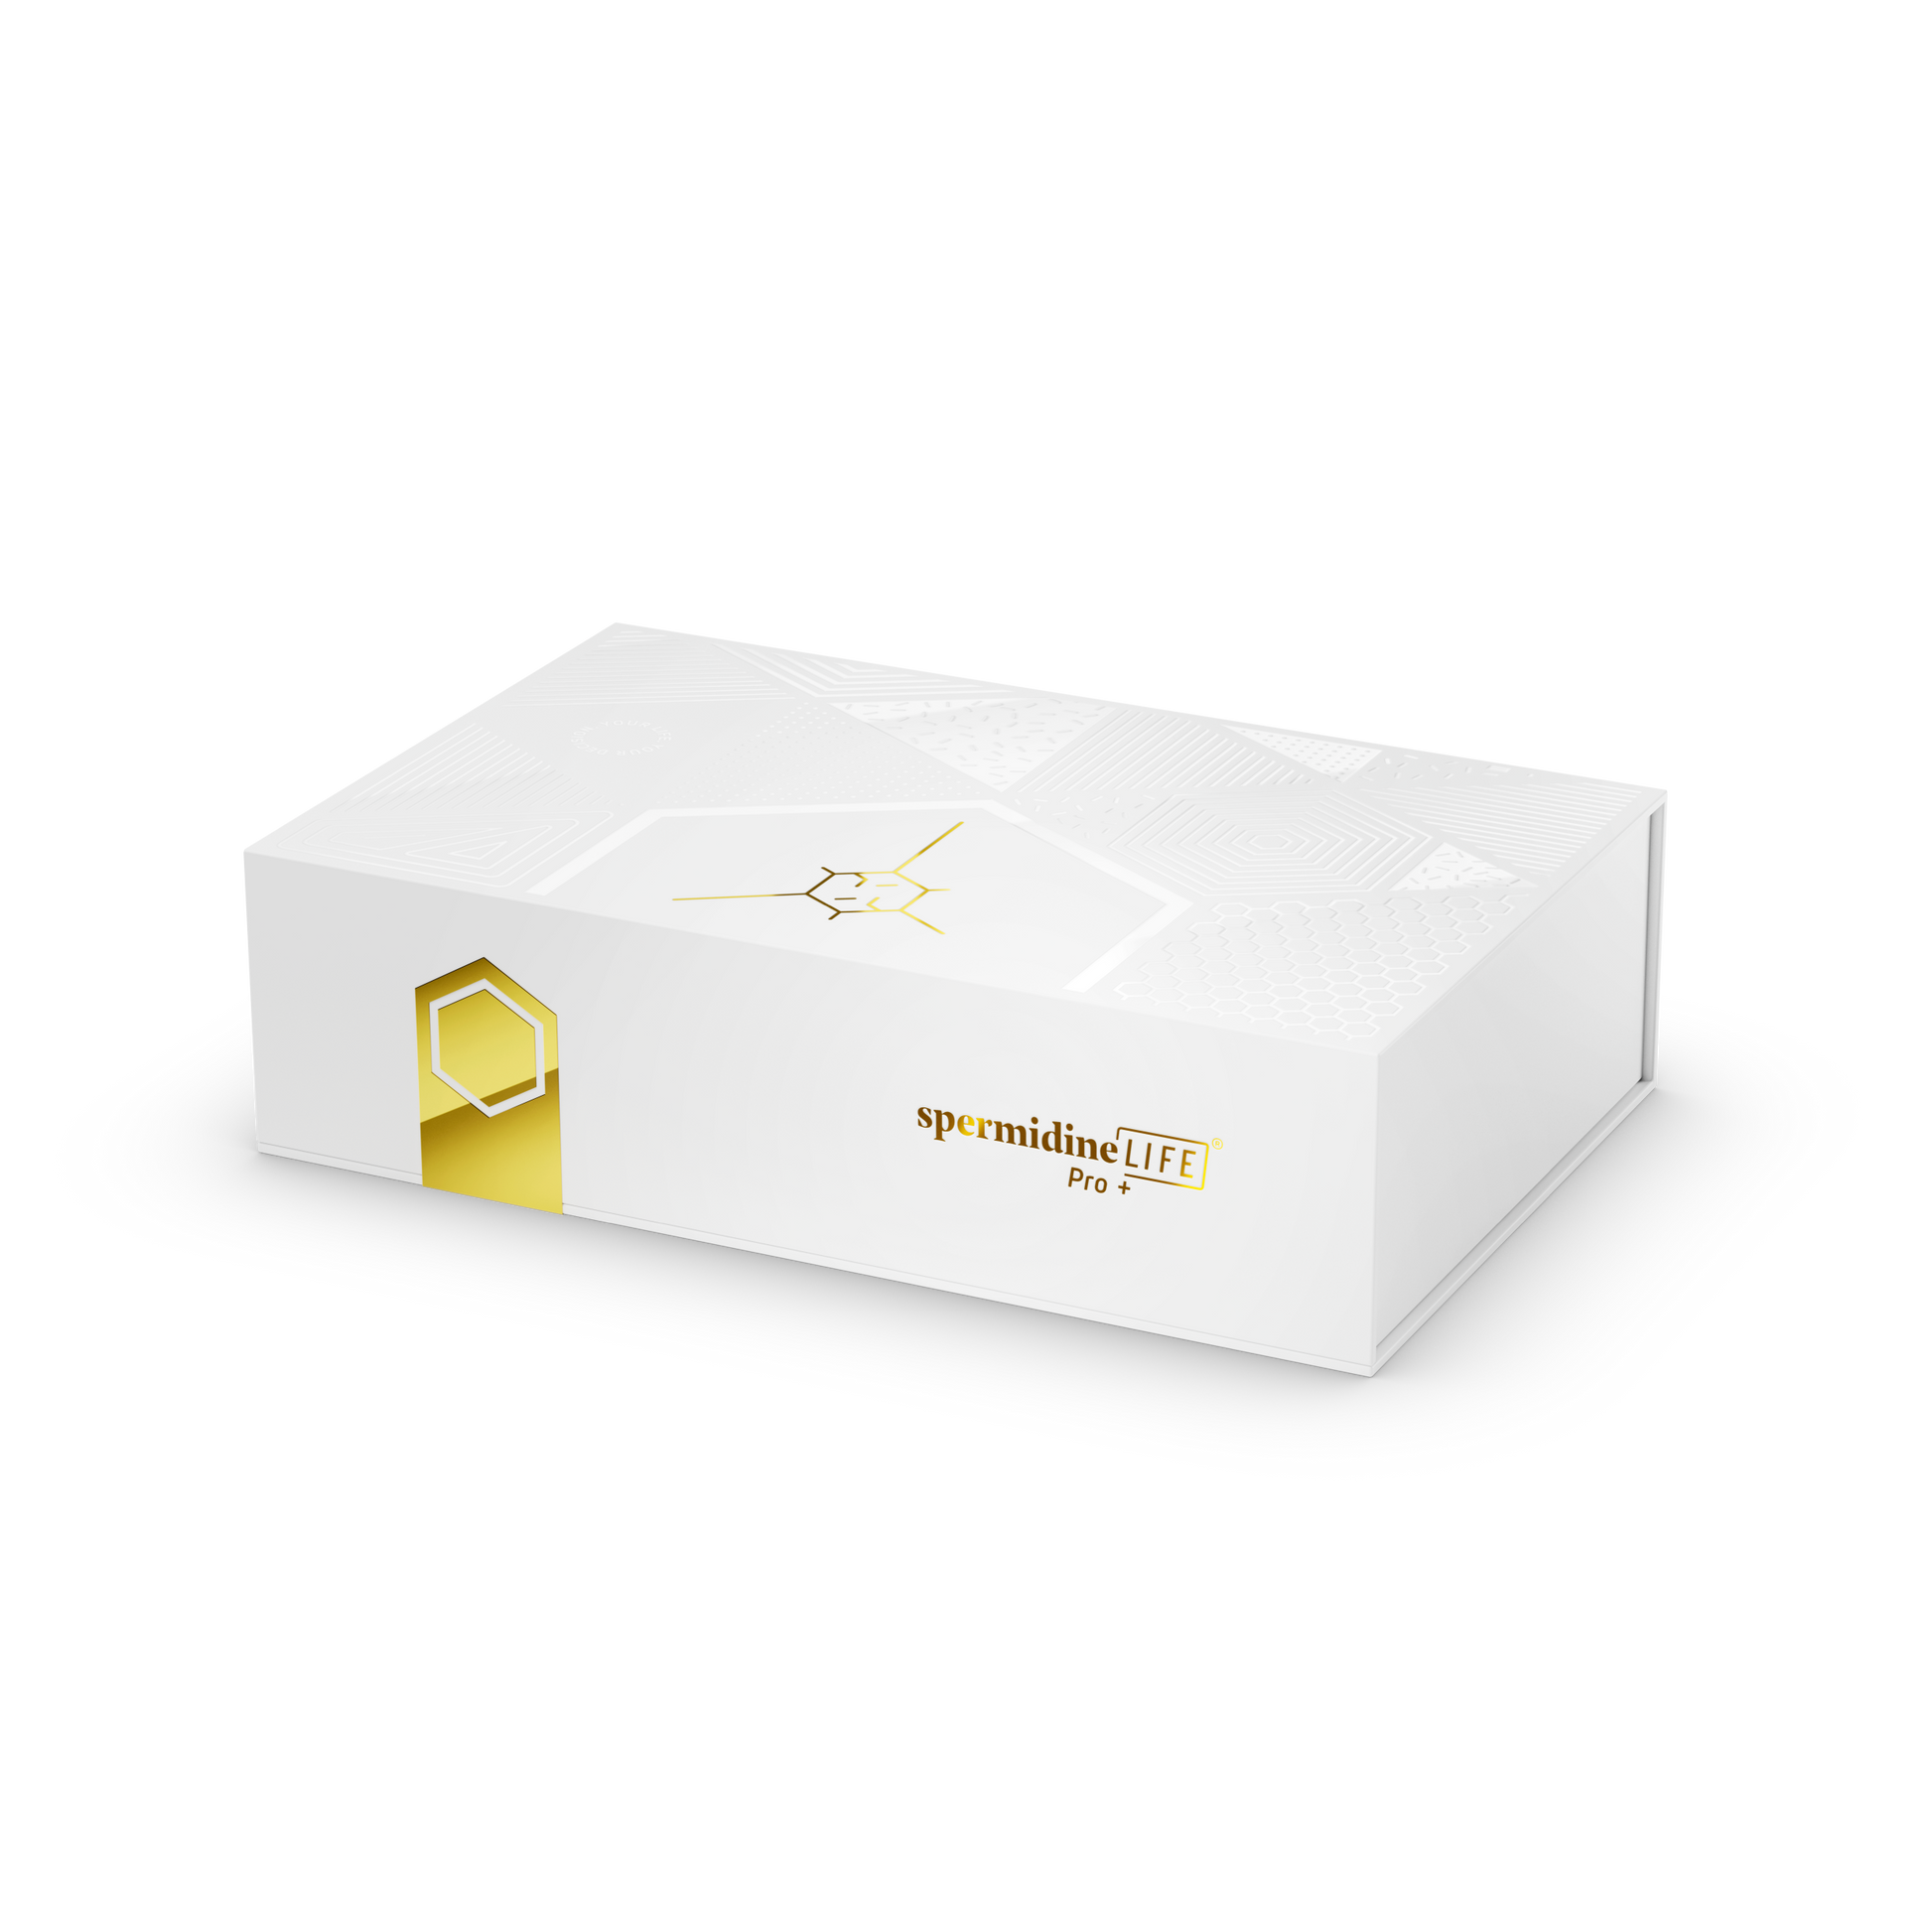 A white box with a gold logo on it containing sachet-packs of spermidineLIFE PRO+® in 6mg daily dose has been replaced with "A white box with a gold logo on it containing sachet-packs of spermidineLIFE® Pro+ 4300mg 30-Pack Drawer from Longevity Labs, Inc.